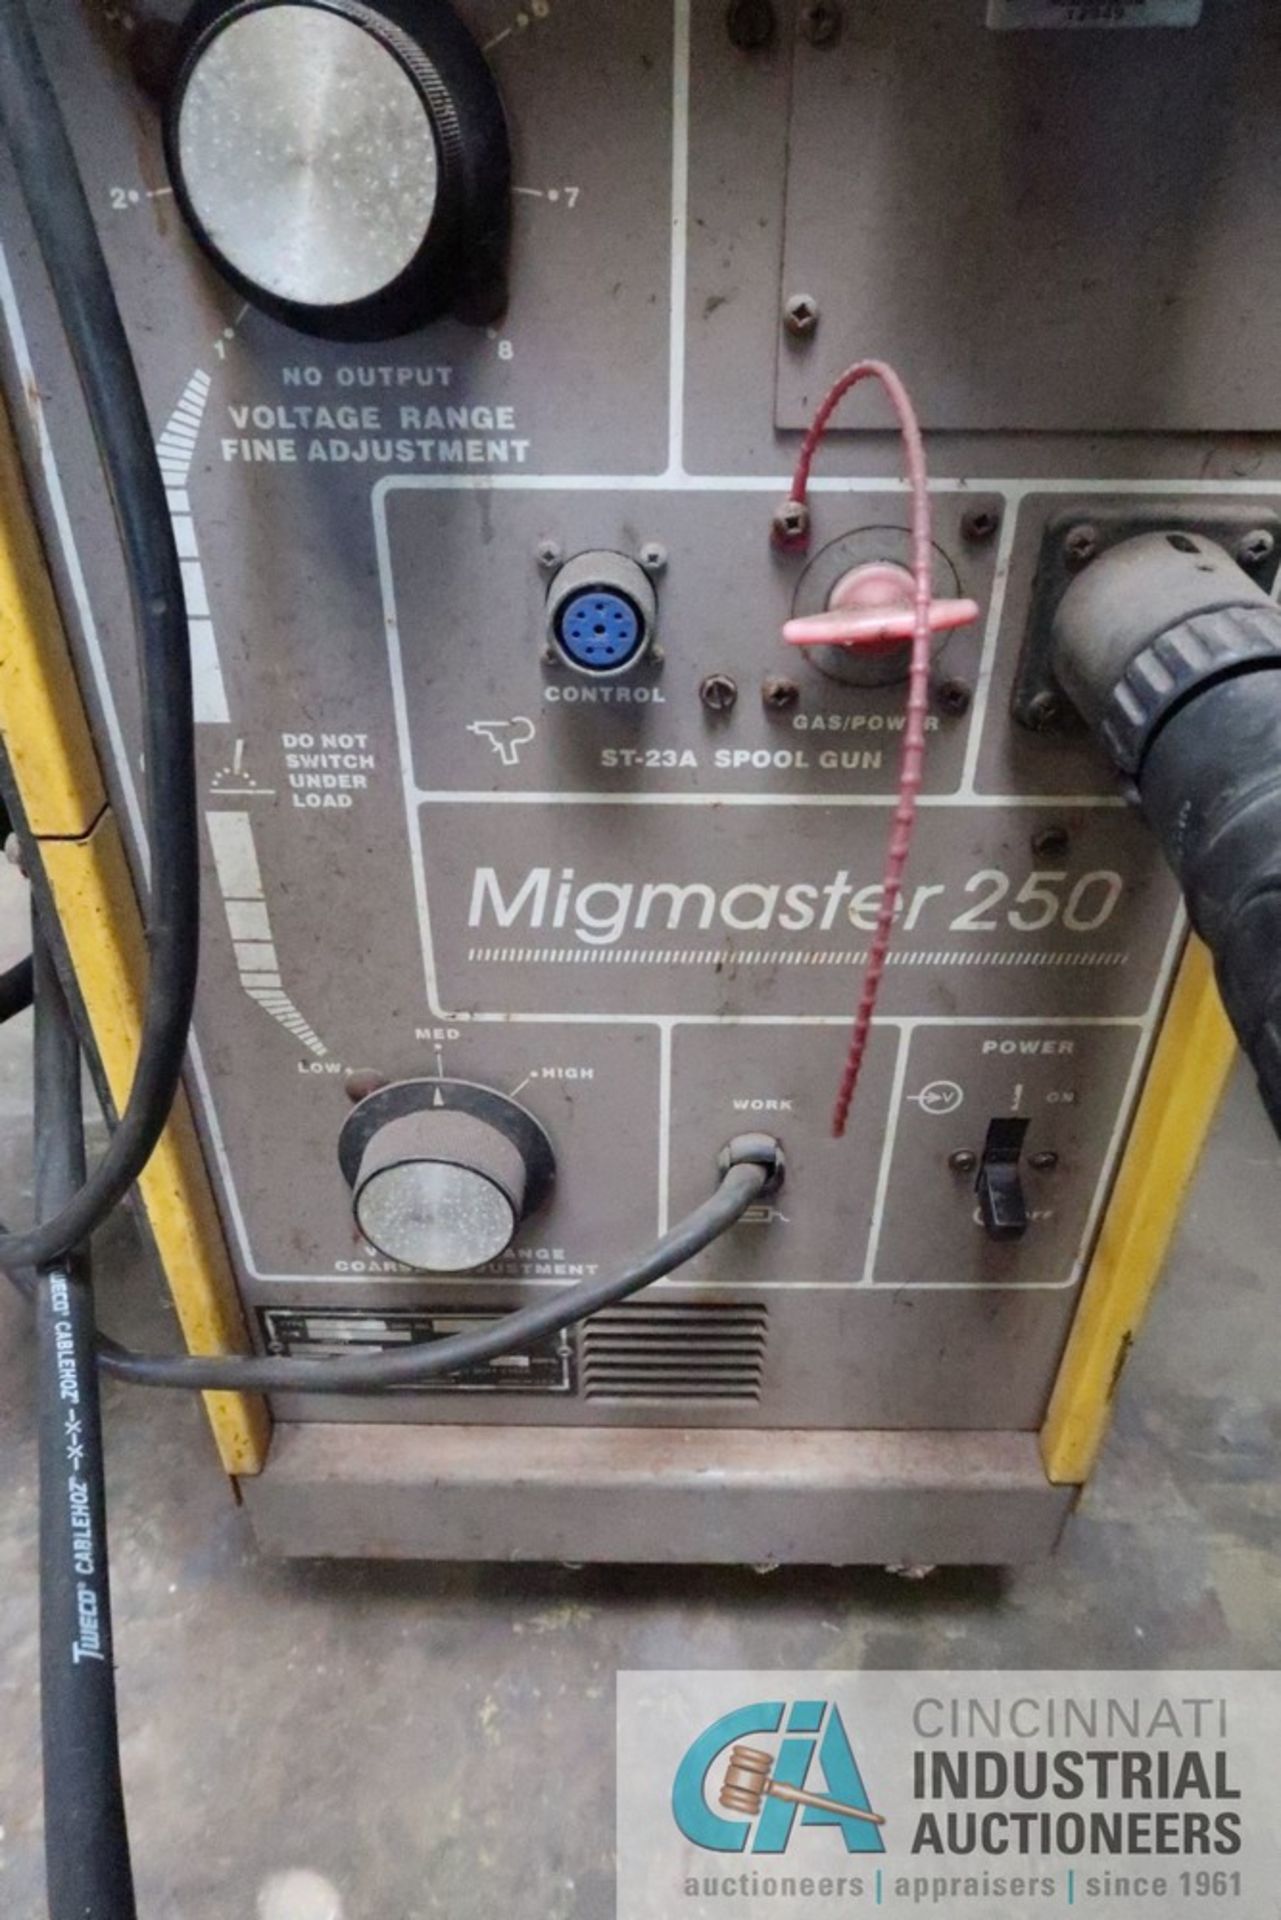 250 AMP ESAB MODEL MIGMASTER 250 MIG WELDING POWER SOURCE; S/N MA-I741155, WITH BUILT IN WIRE - Image 4 of 5